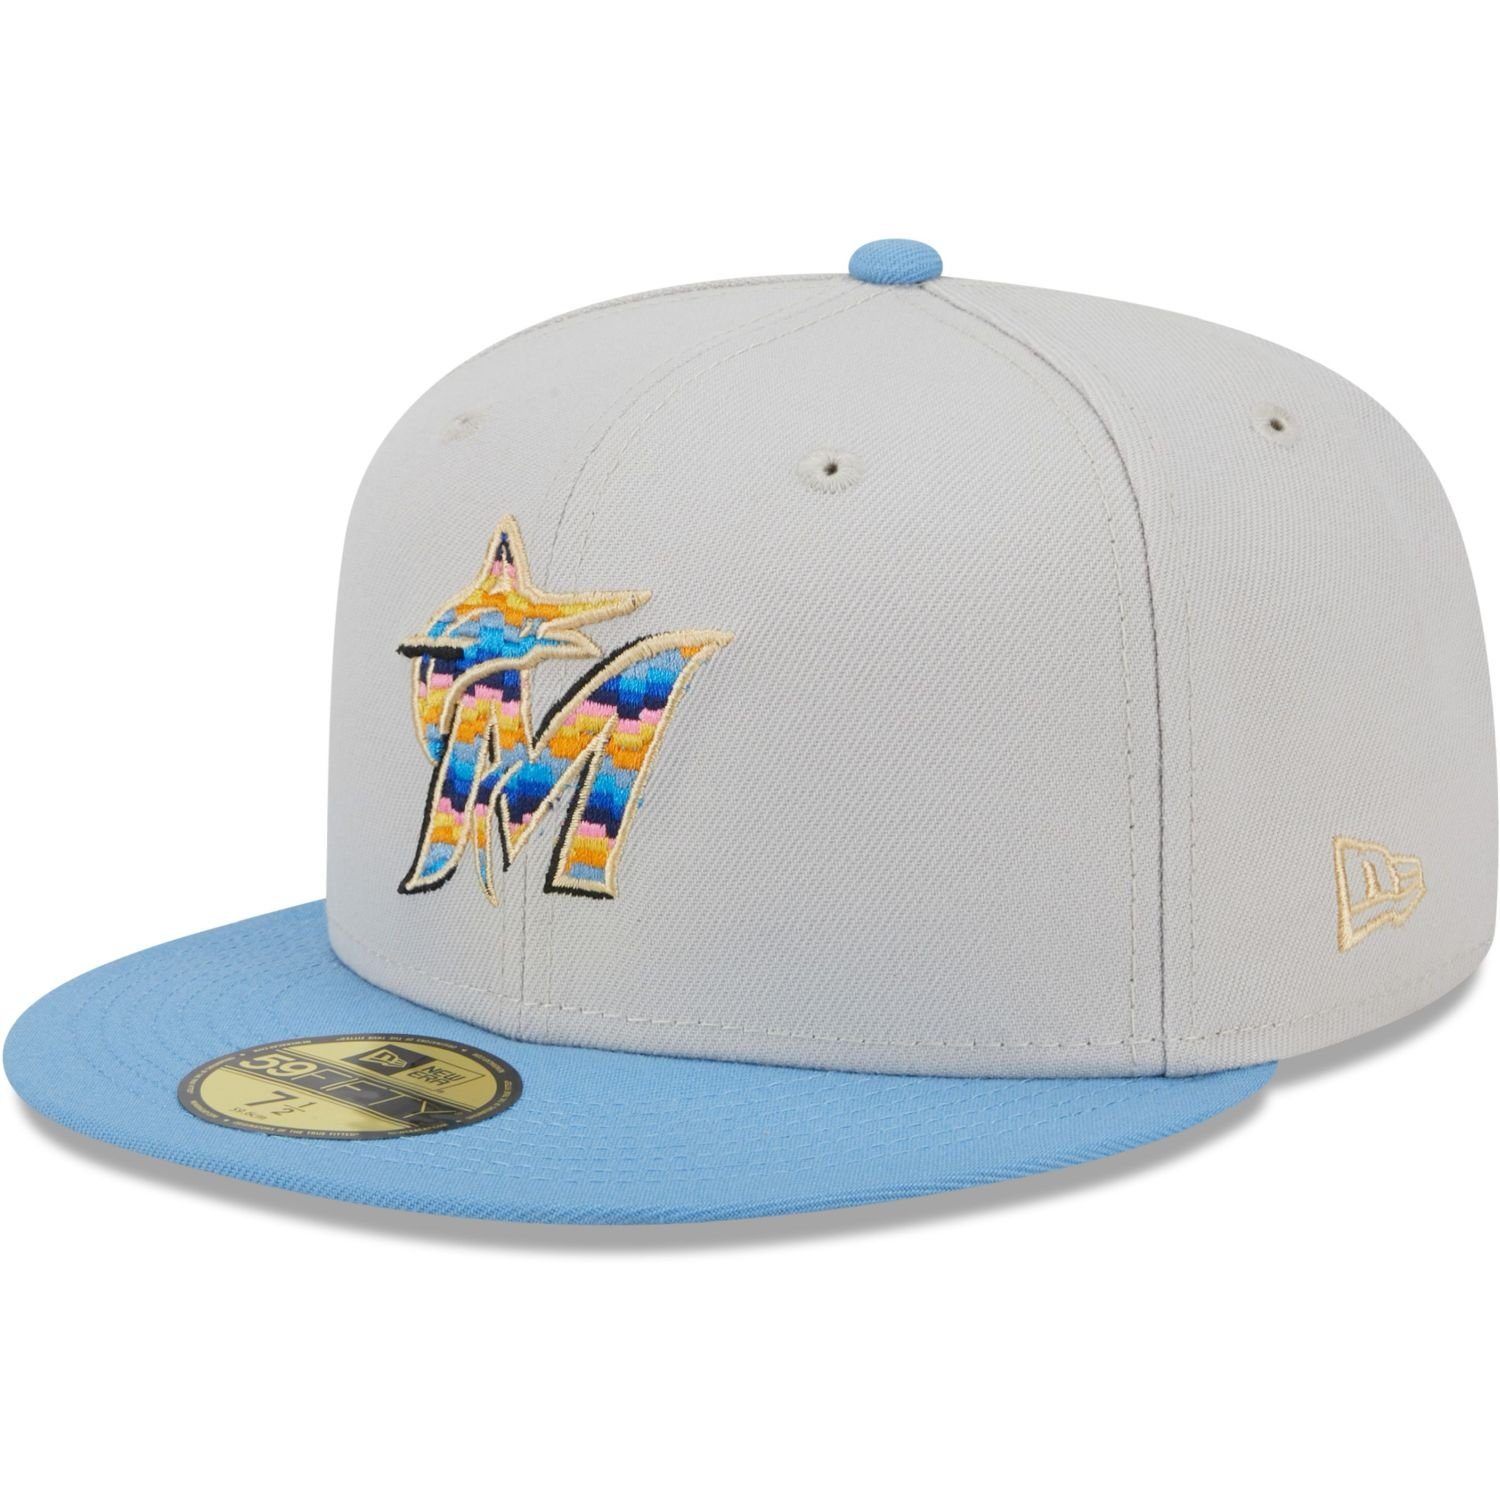 New Era Fitted Cap 59Fifty BEACHFRONT Miami Marlins